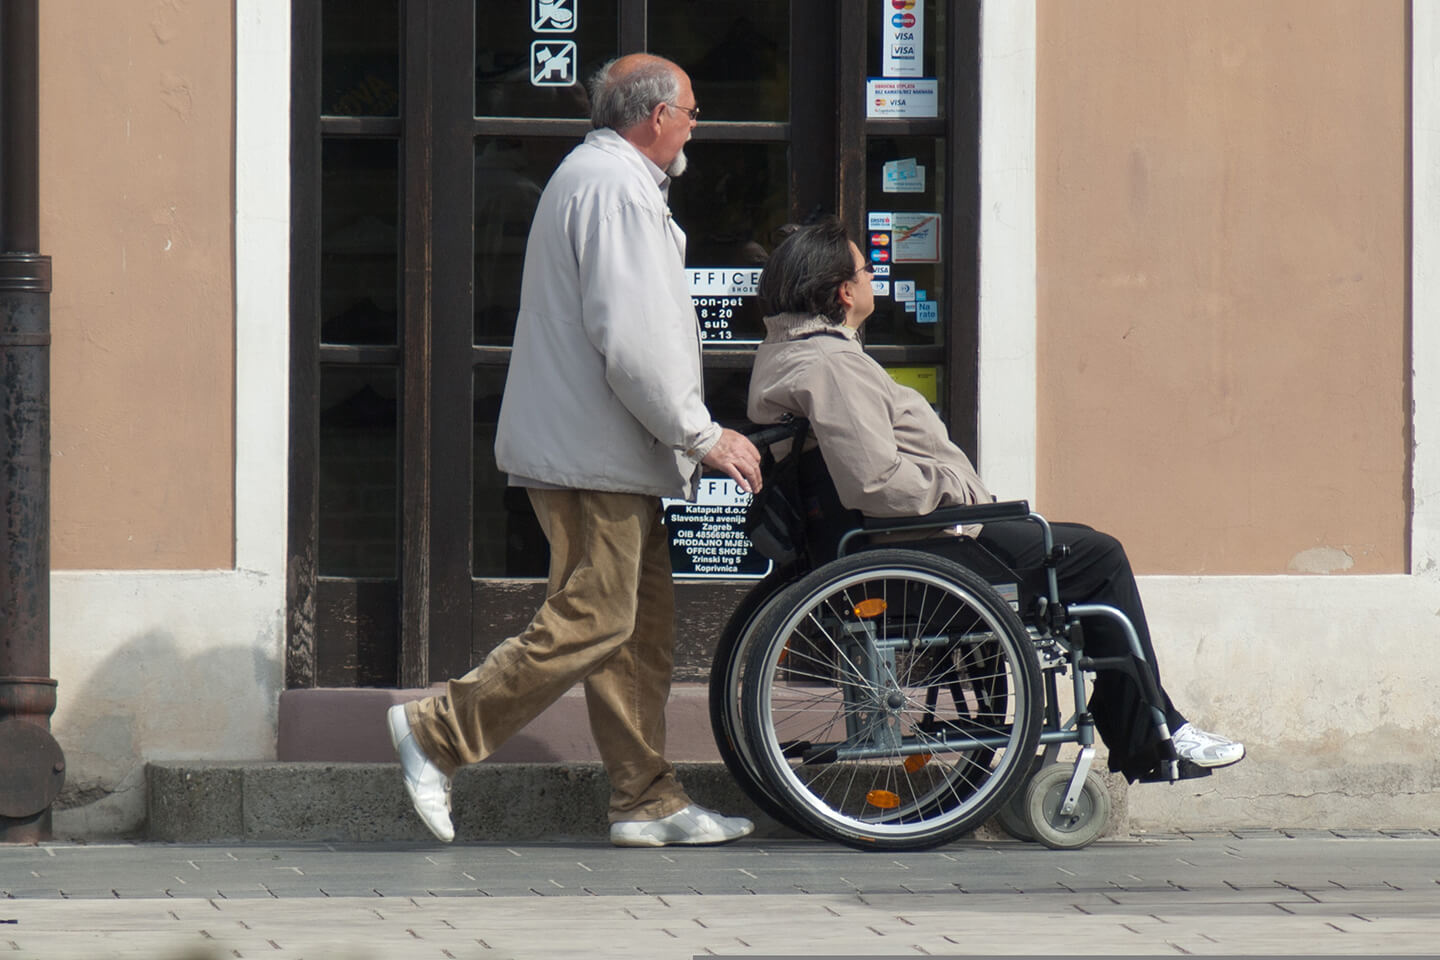 Man pushing another man in a wheelchair